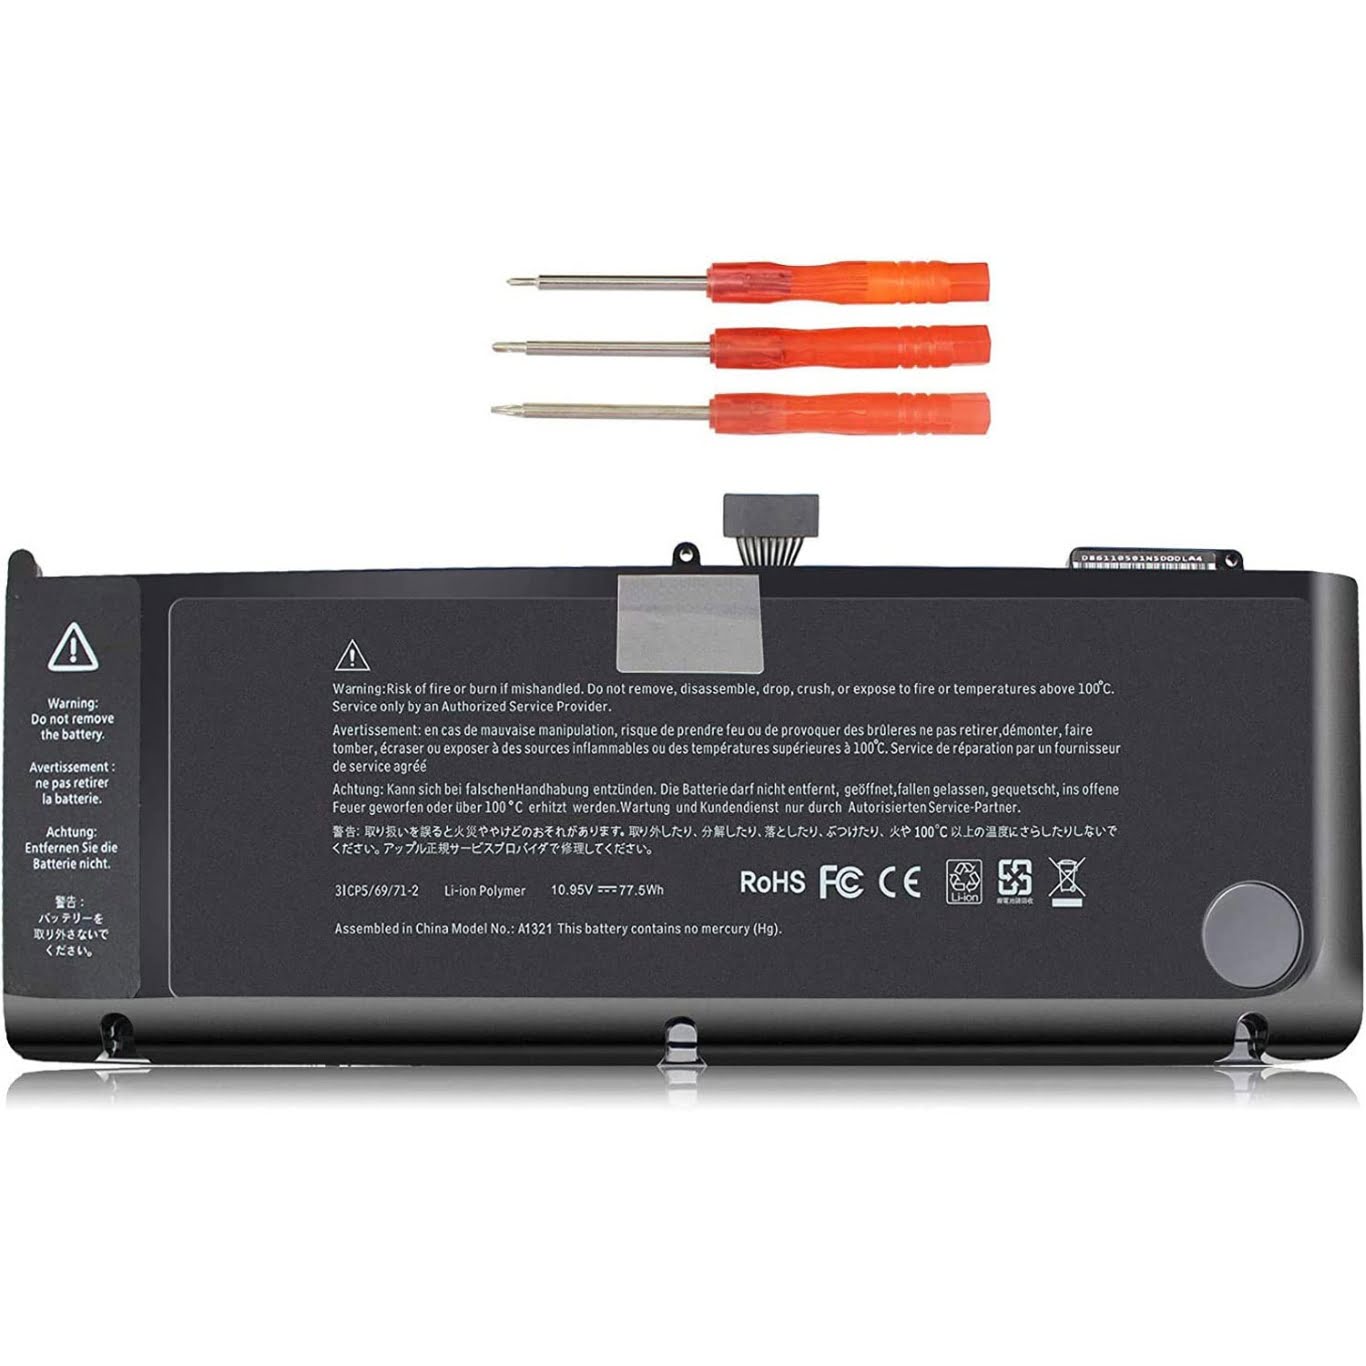 661-5211, 661-5476 replacement Laptop Battery for Apple MacBook Pro 15  A1286 (2009 Version), MacBook Pro 15  MB985*/A, 10.95v, 73wh, 6 cells